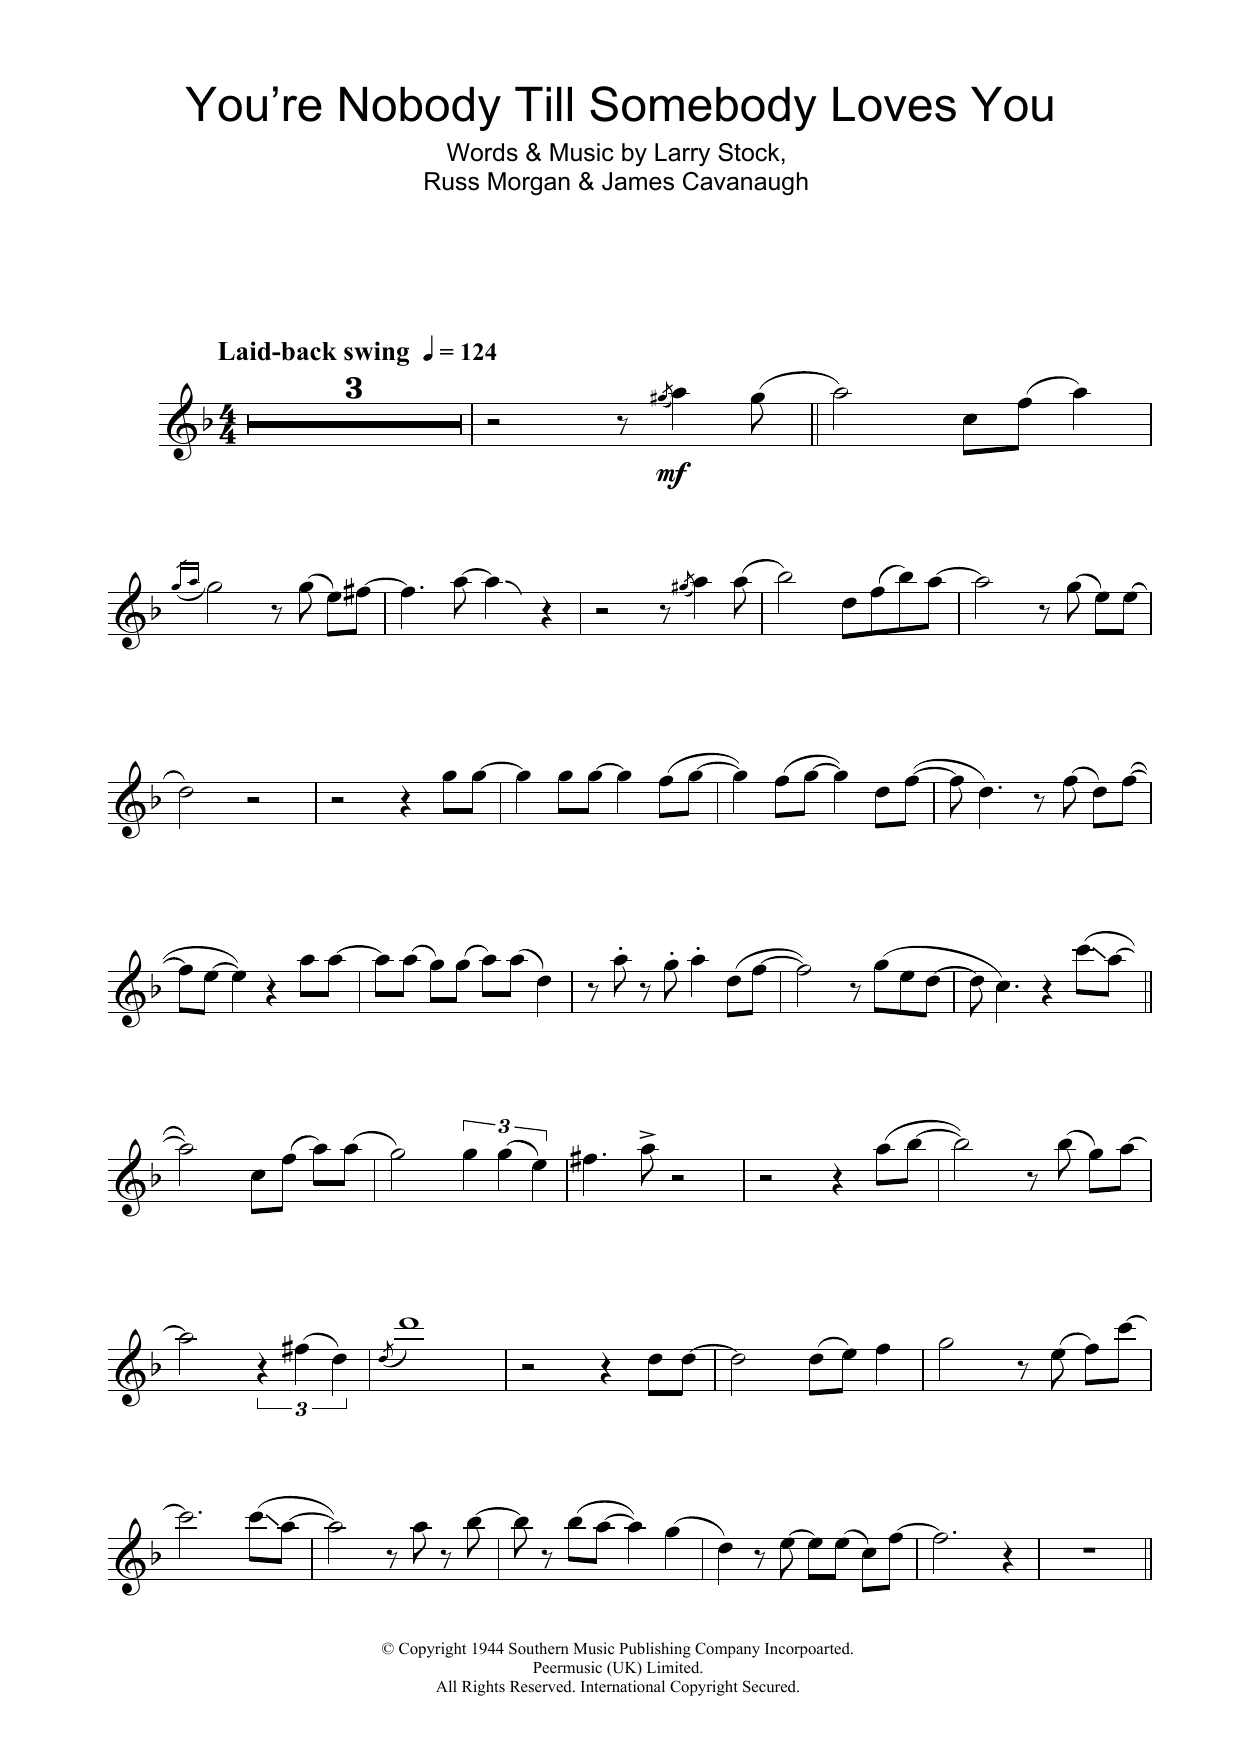 Frank Sinatra You're Nobody Till Somebody Loves You sheet music notes and chords. Download Printable PDF.